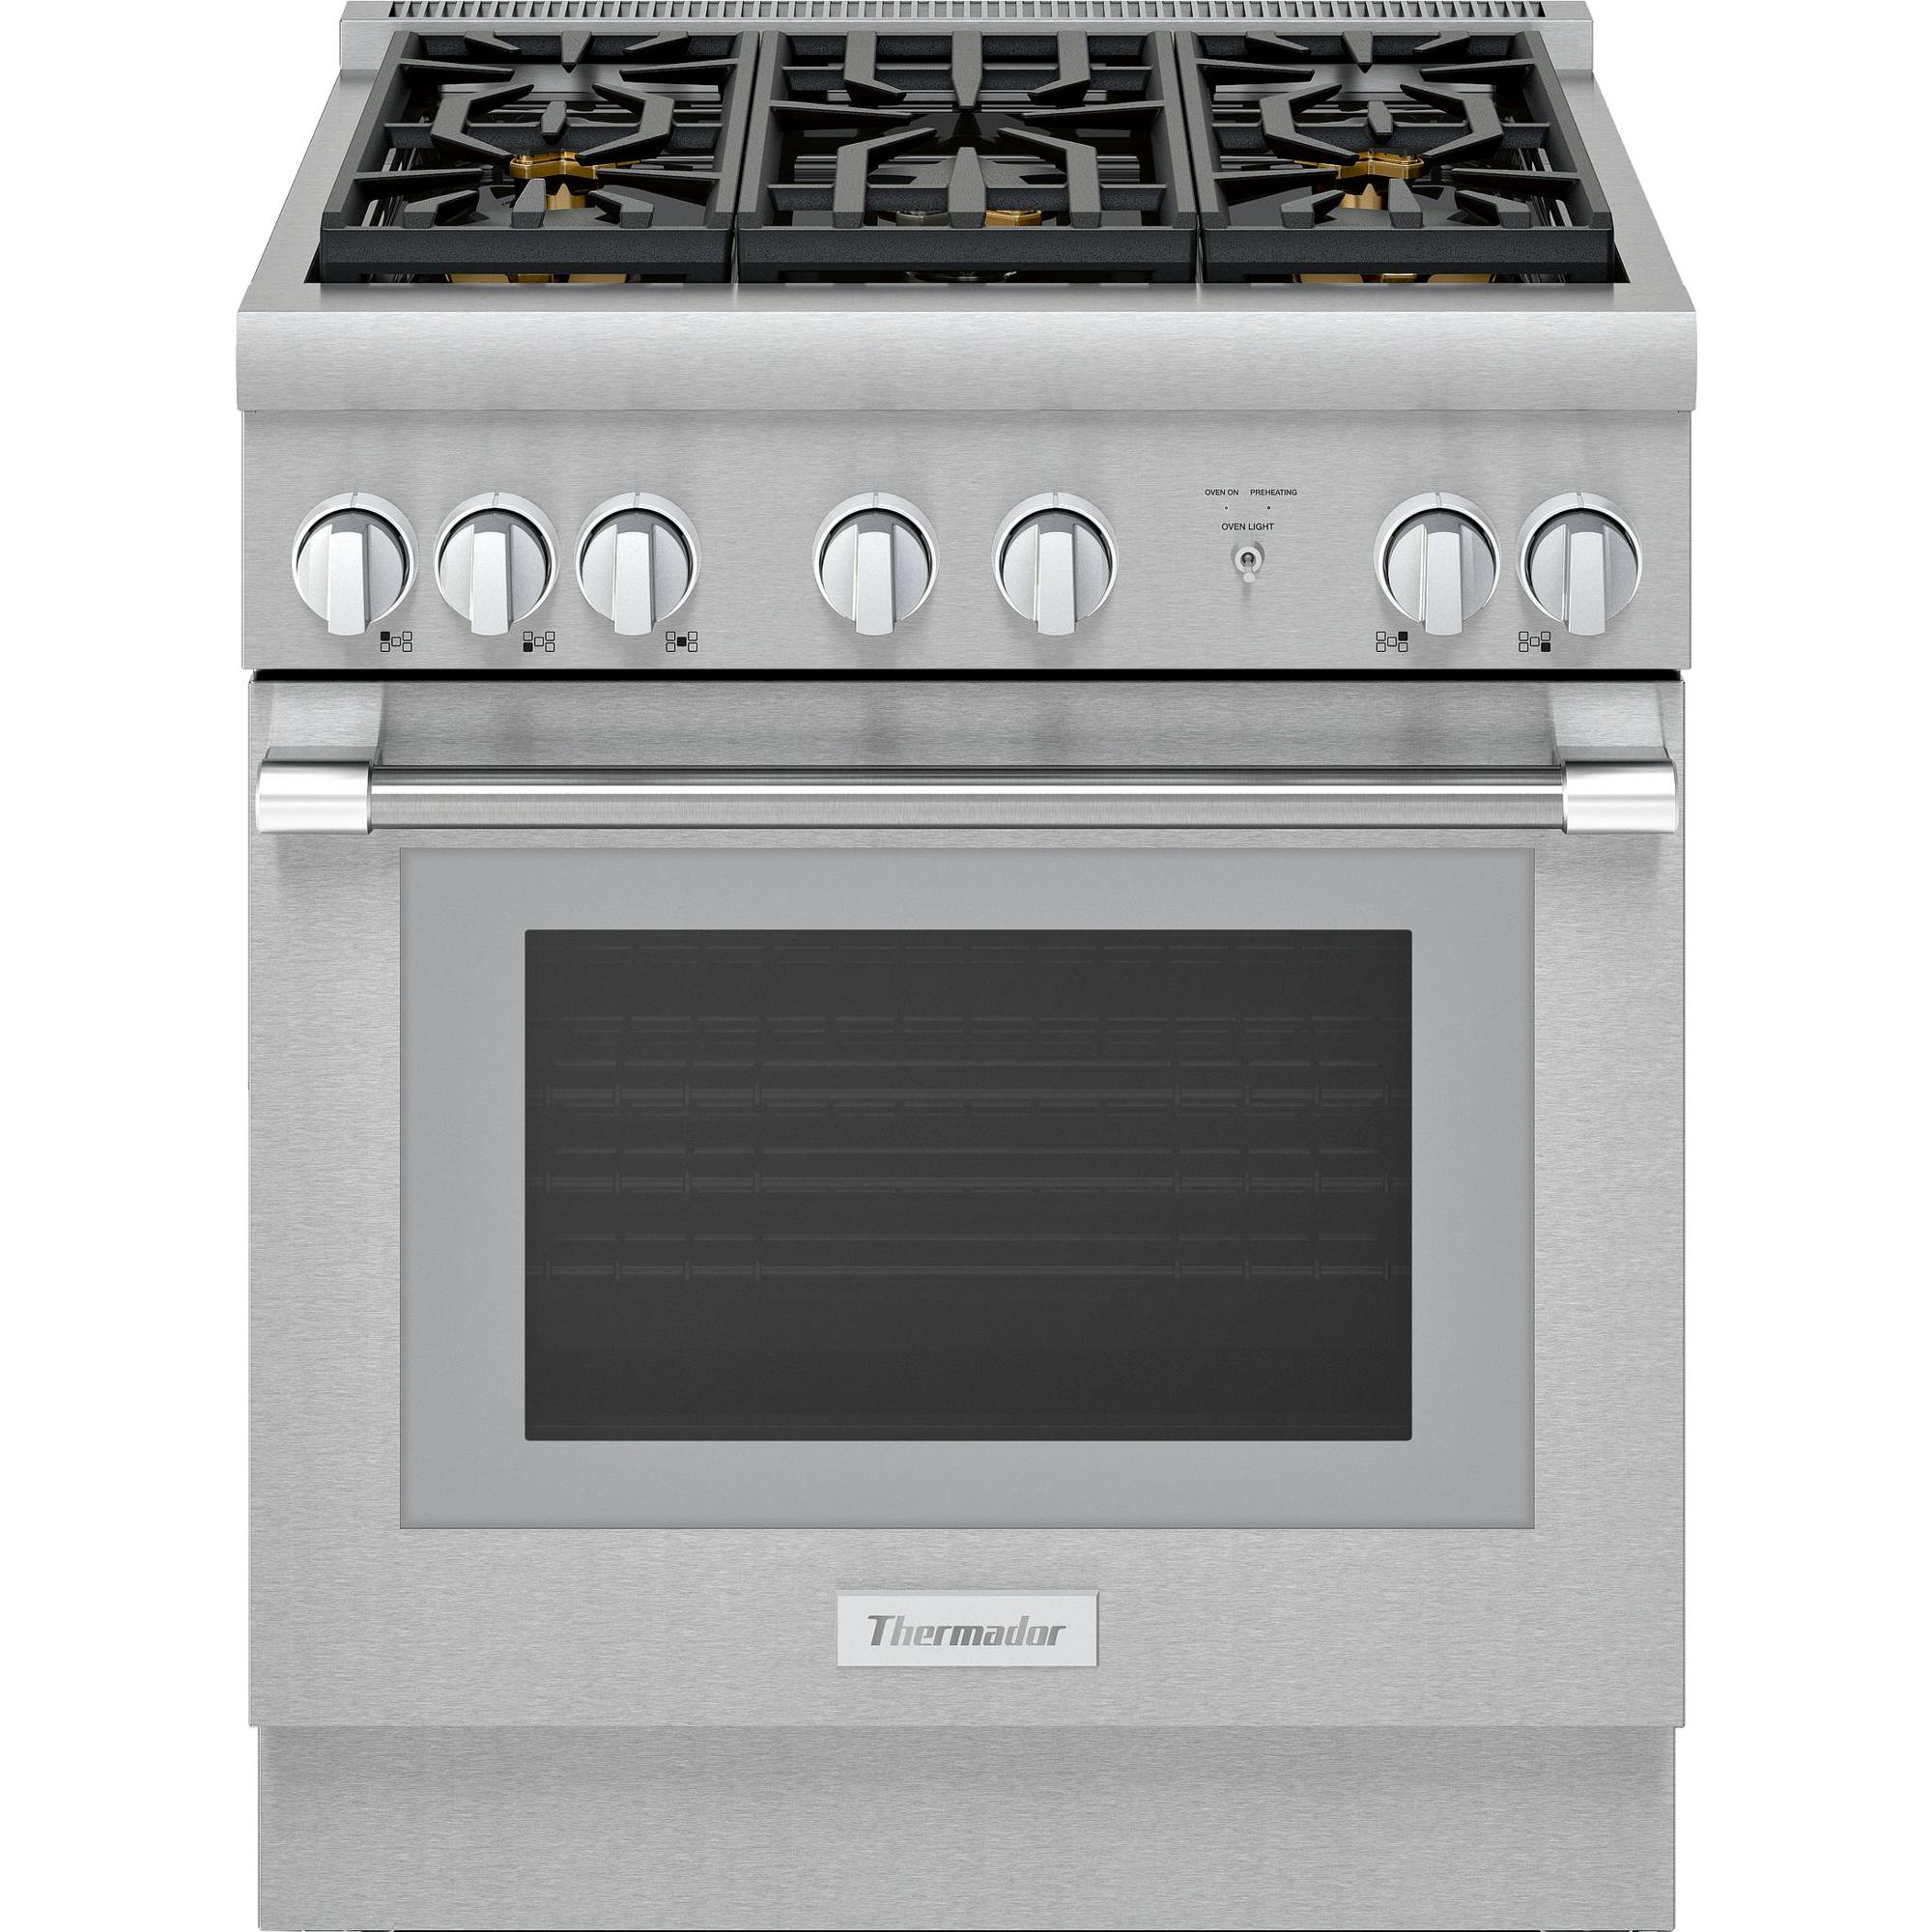 Thermador 30-inch Freestanding Gas Range with ExtraLow? Burners PRG305WH